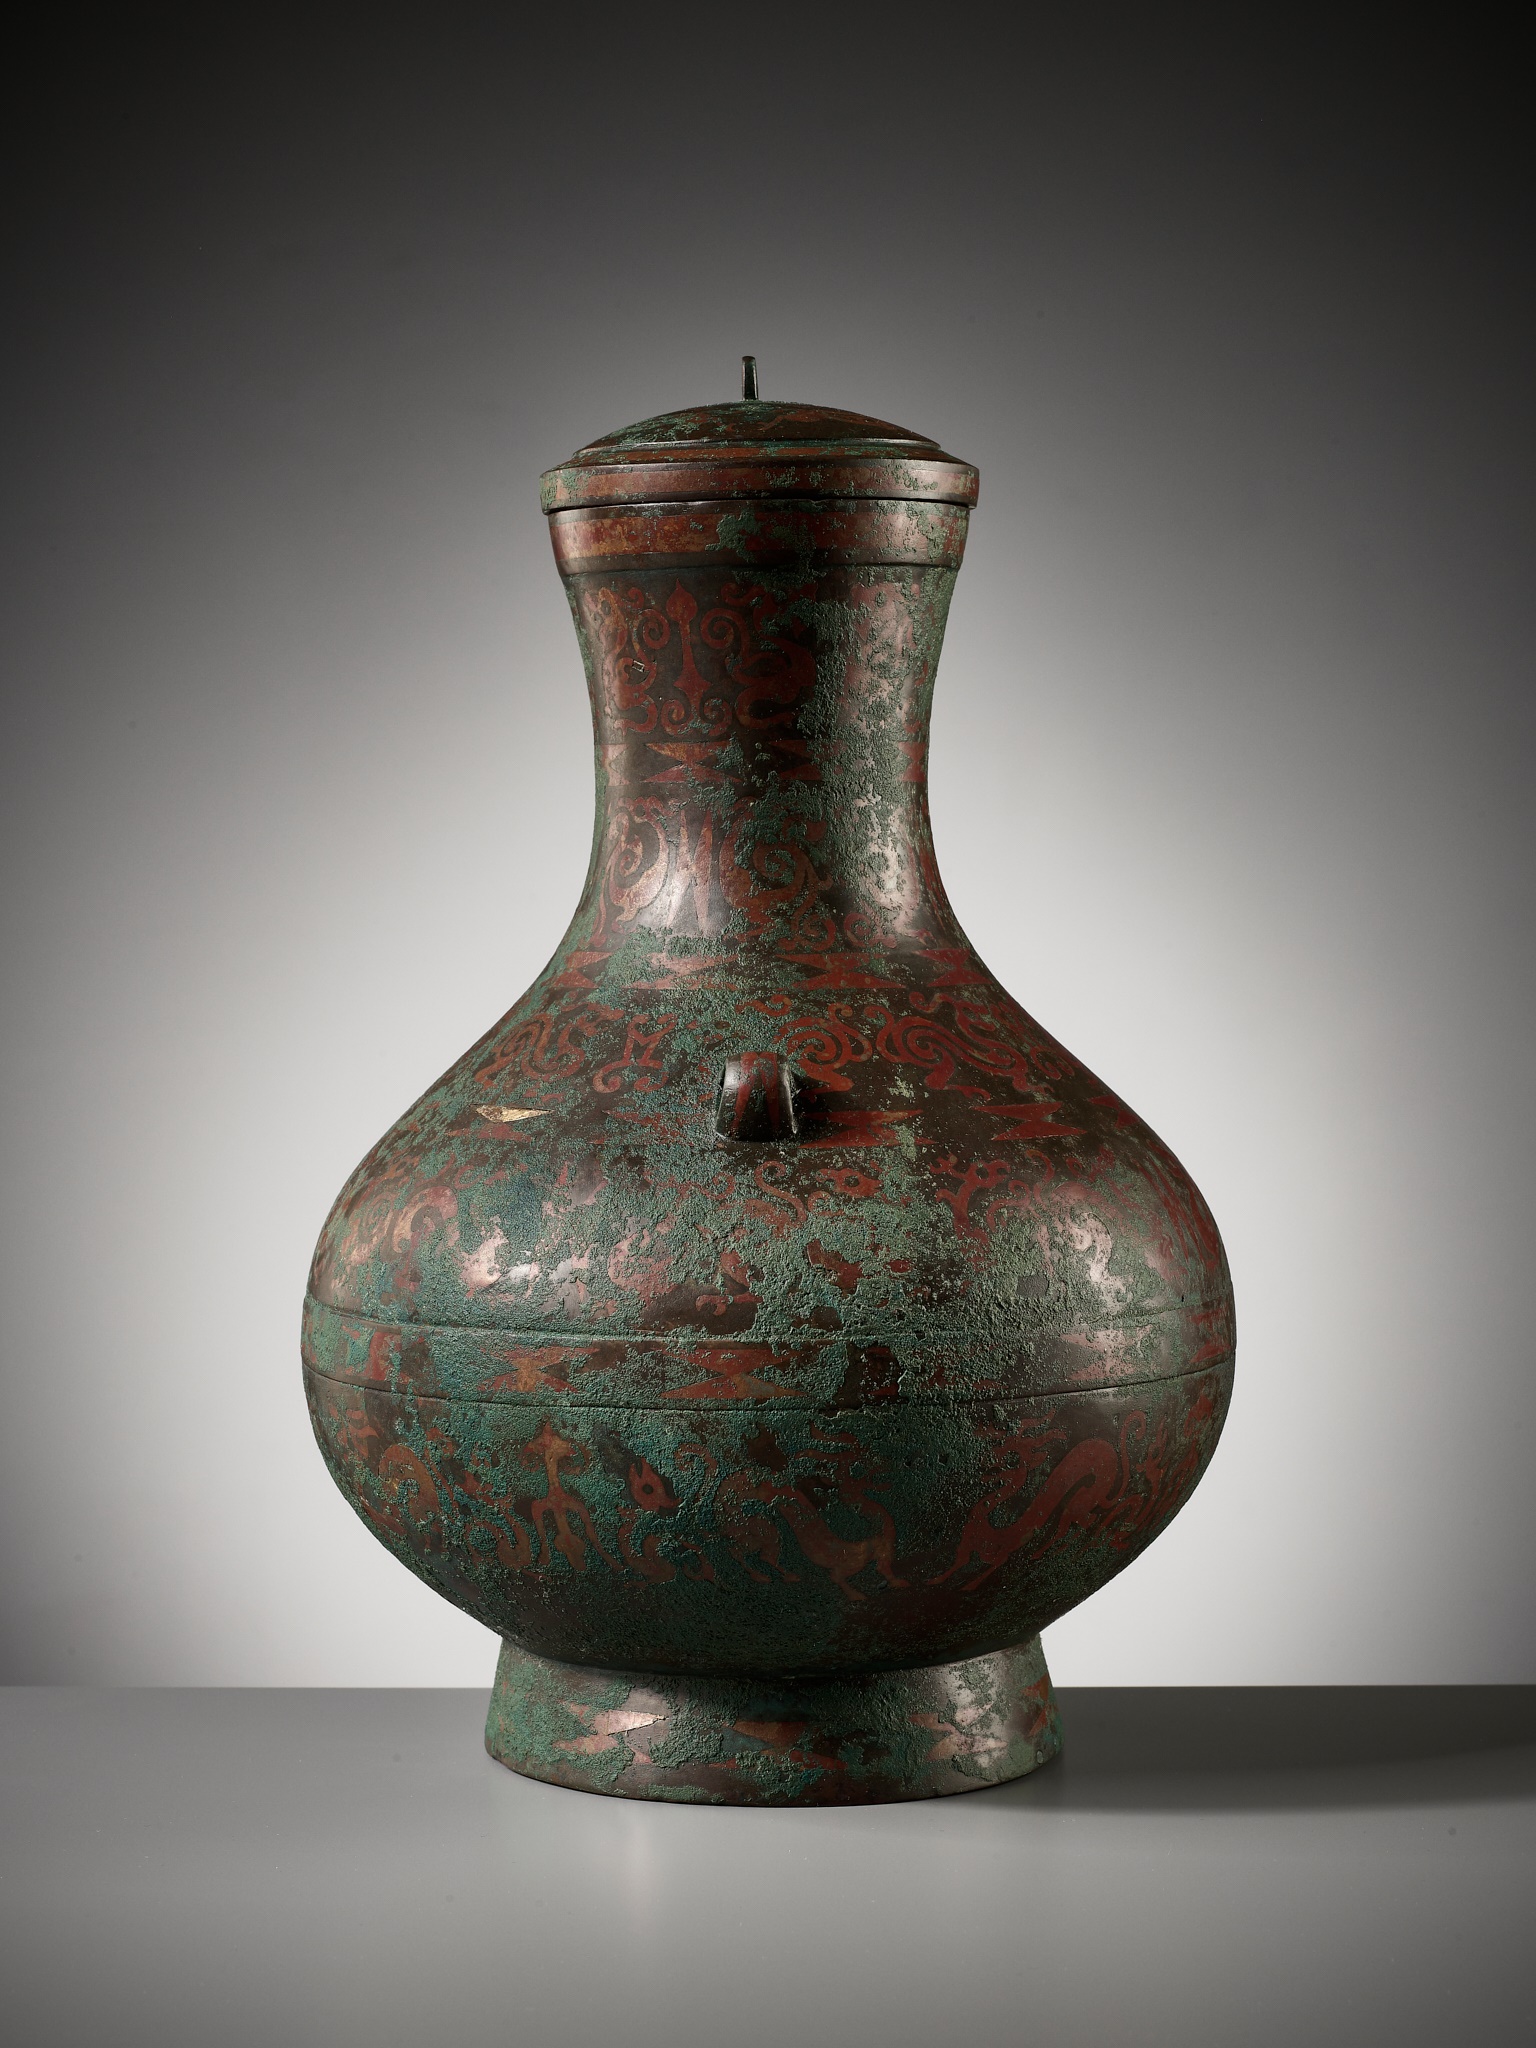 A COPPER-INLAID BRONZE RITUAL WINE VESSEL AND COVER, HU, EASTERN ZHOU DYNASTY - Image 11 of 27